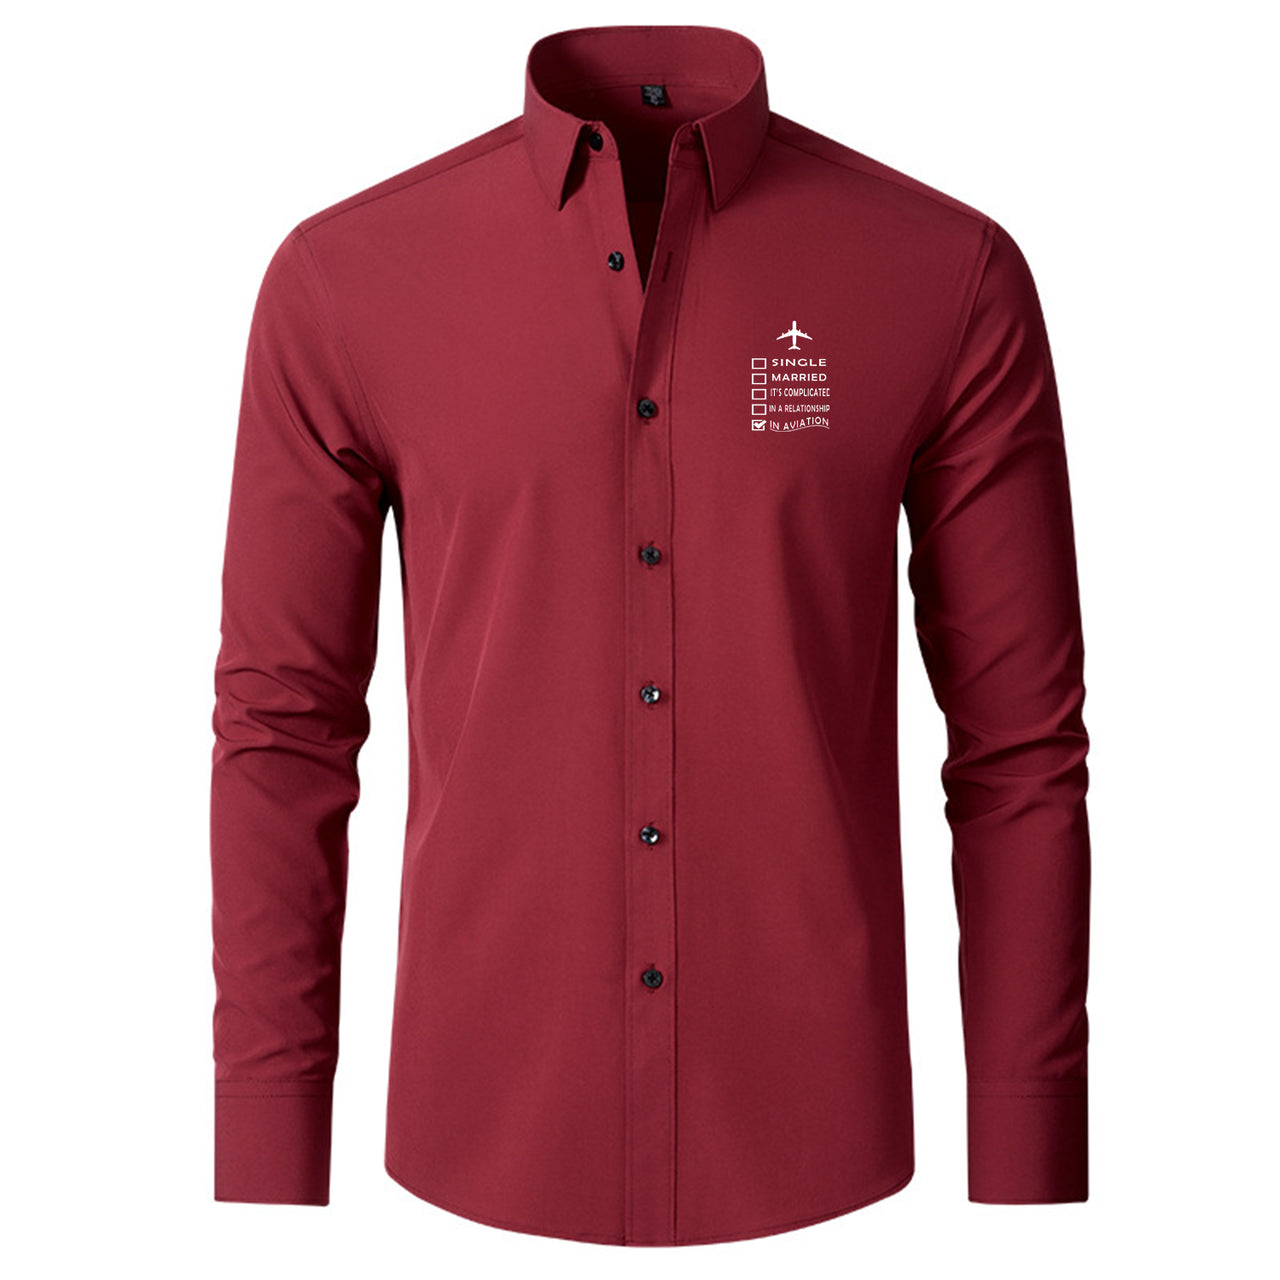 In Aviation Designed Long Sleeve Shirts